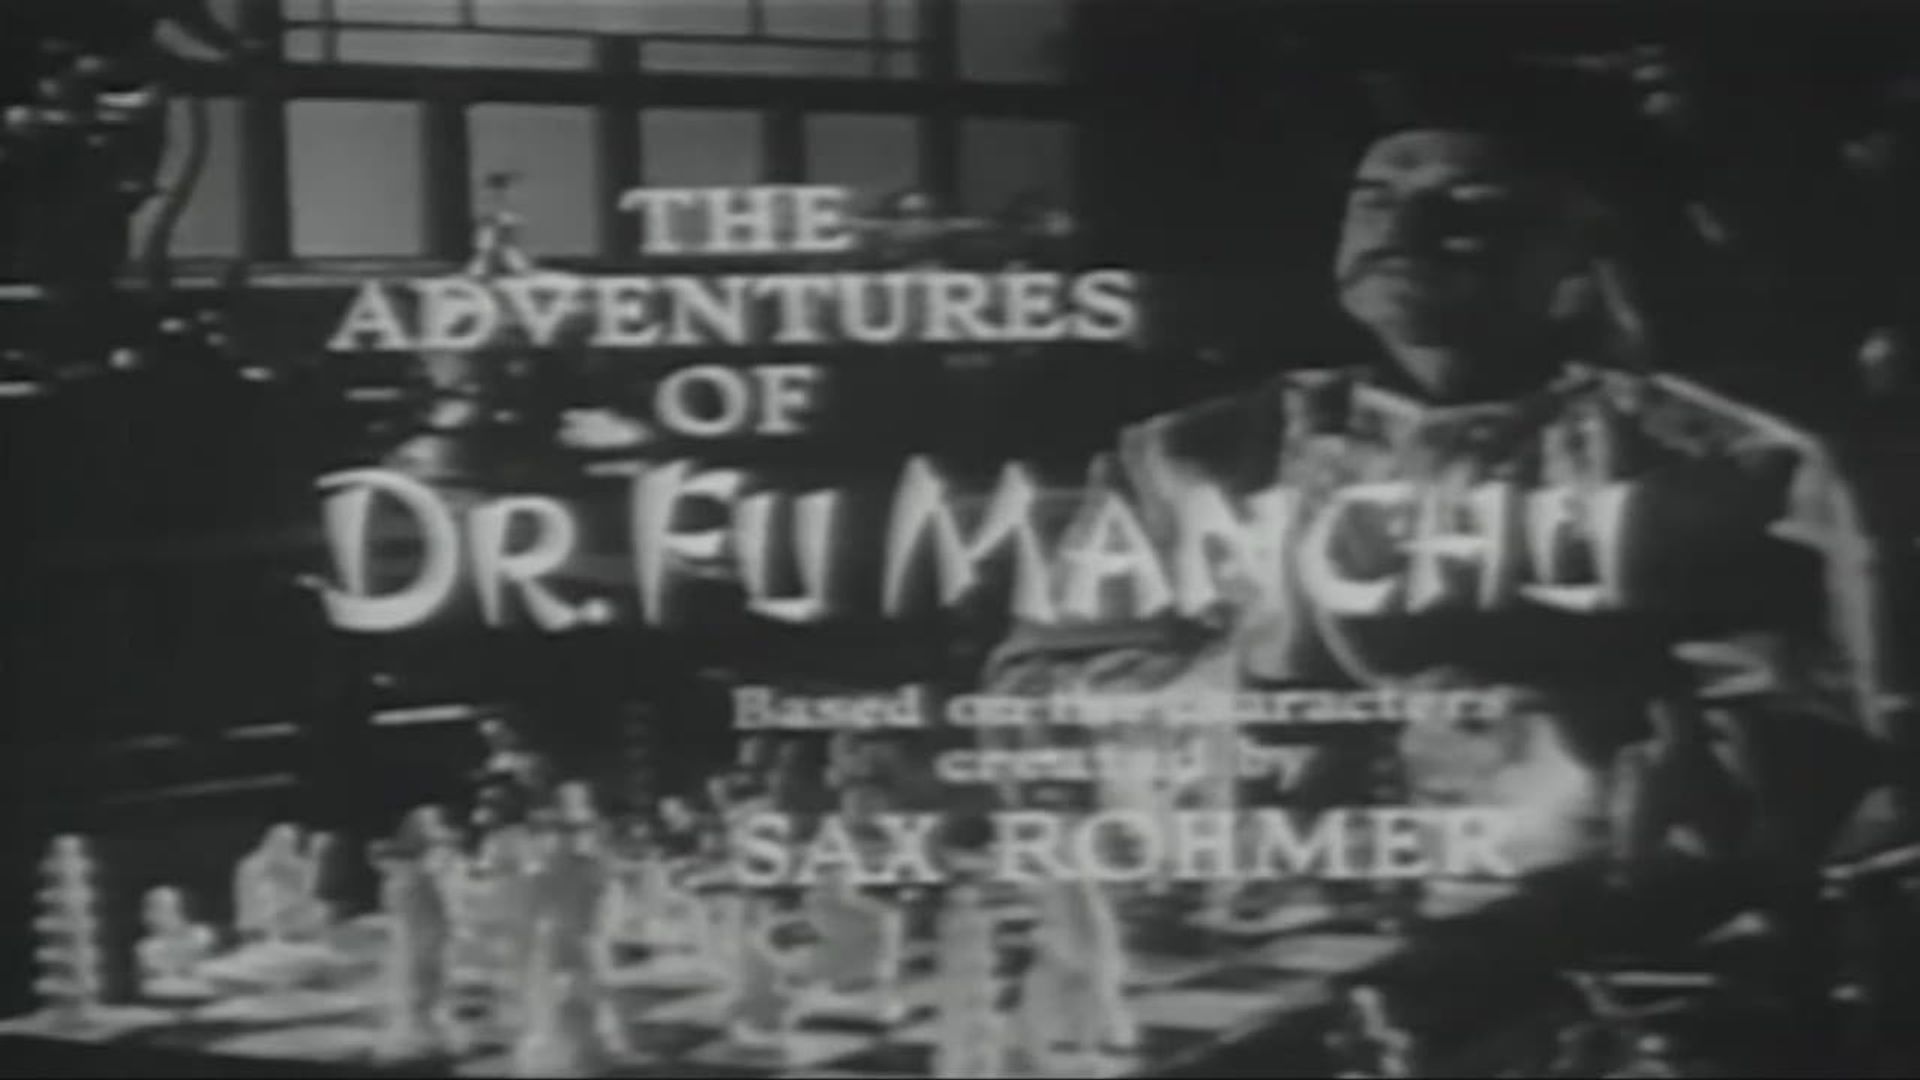 The Adventures of Dr. Fu Manchu background